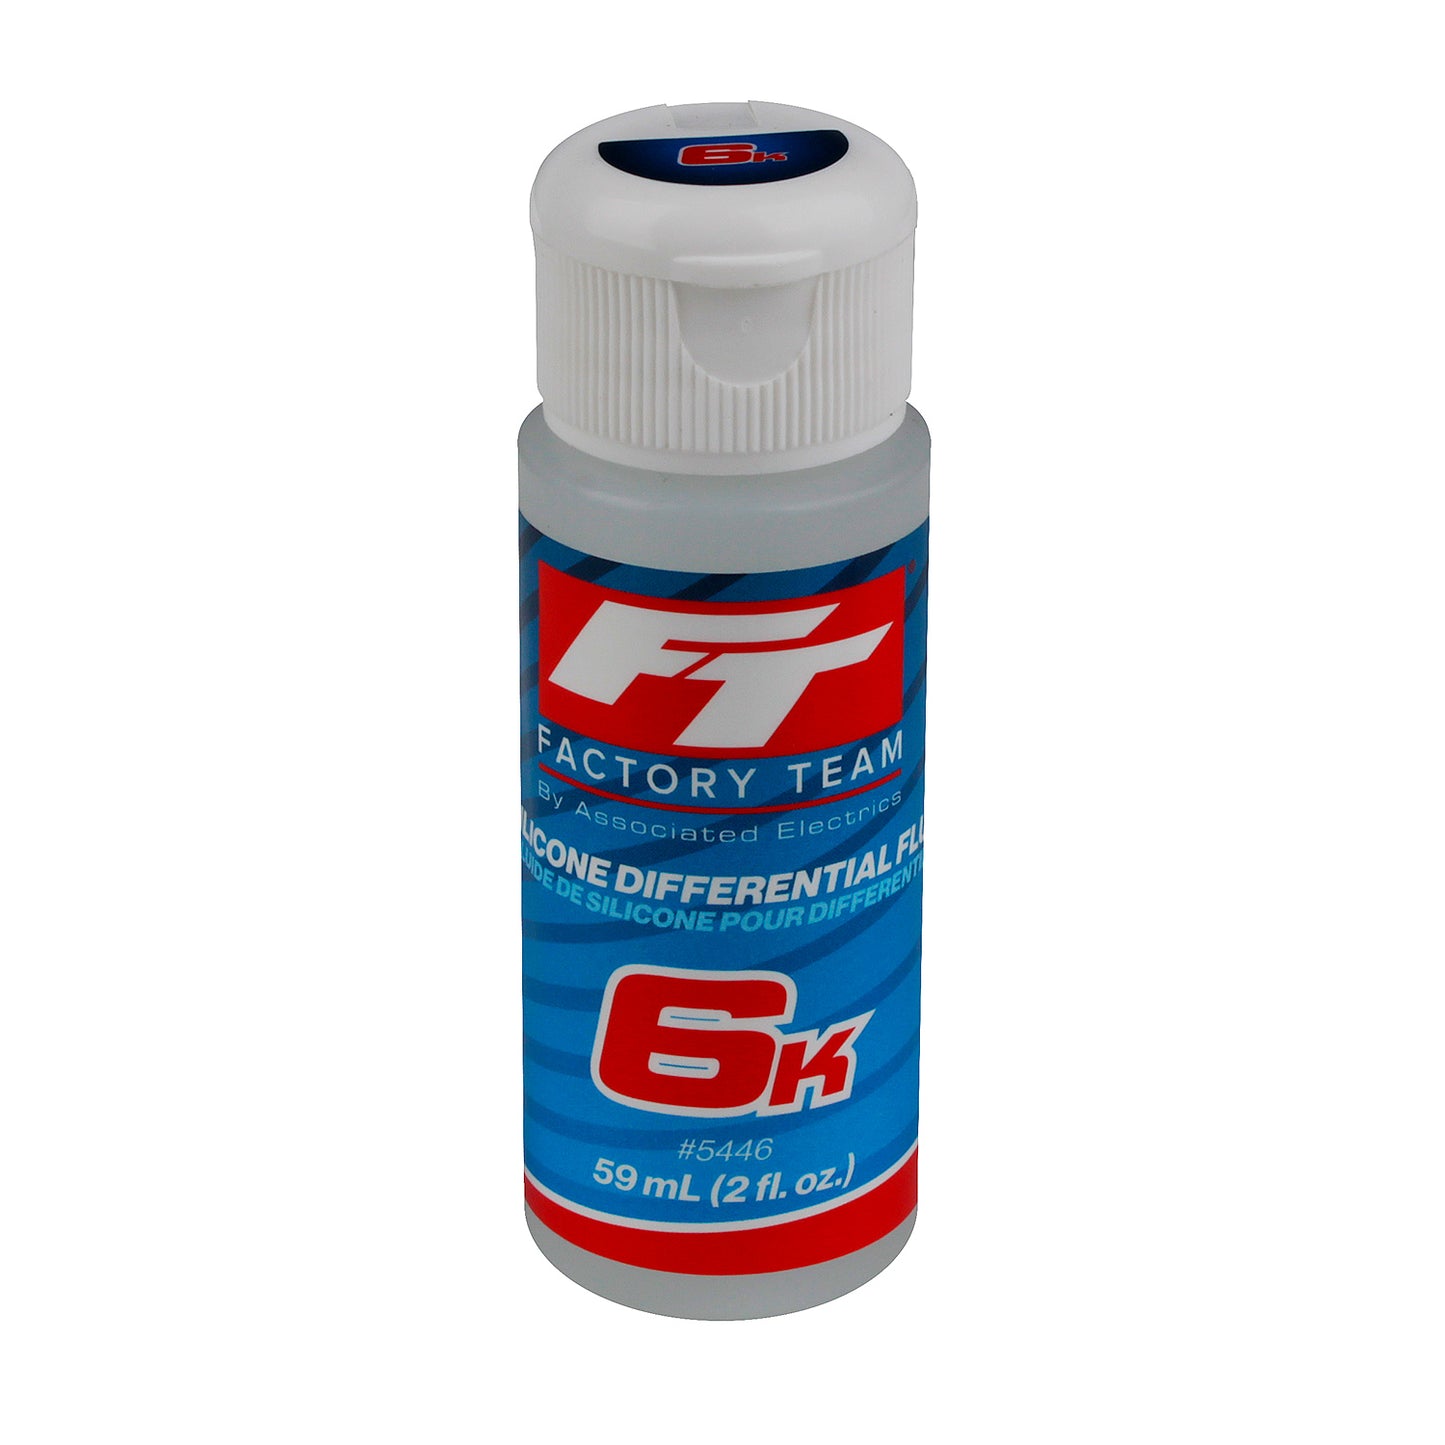 FT Silicone Diff Fluid, 2oz